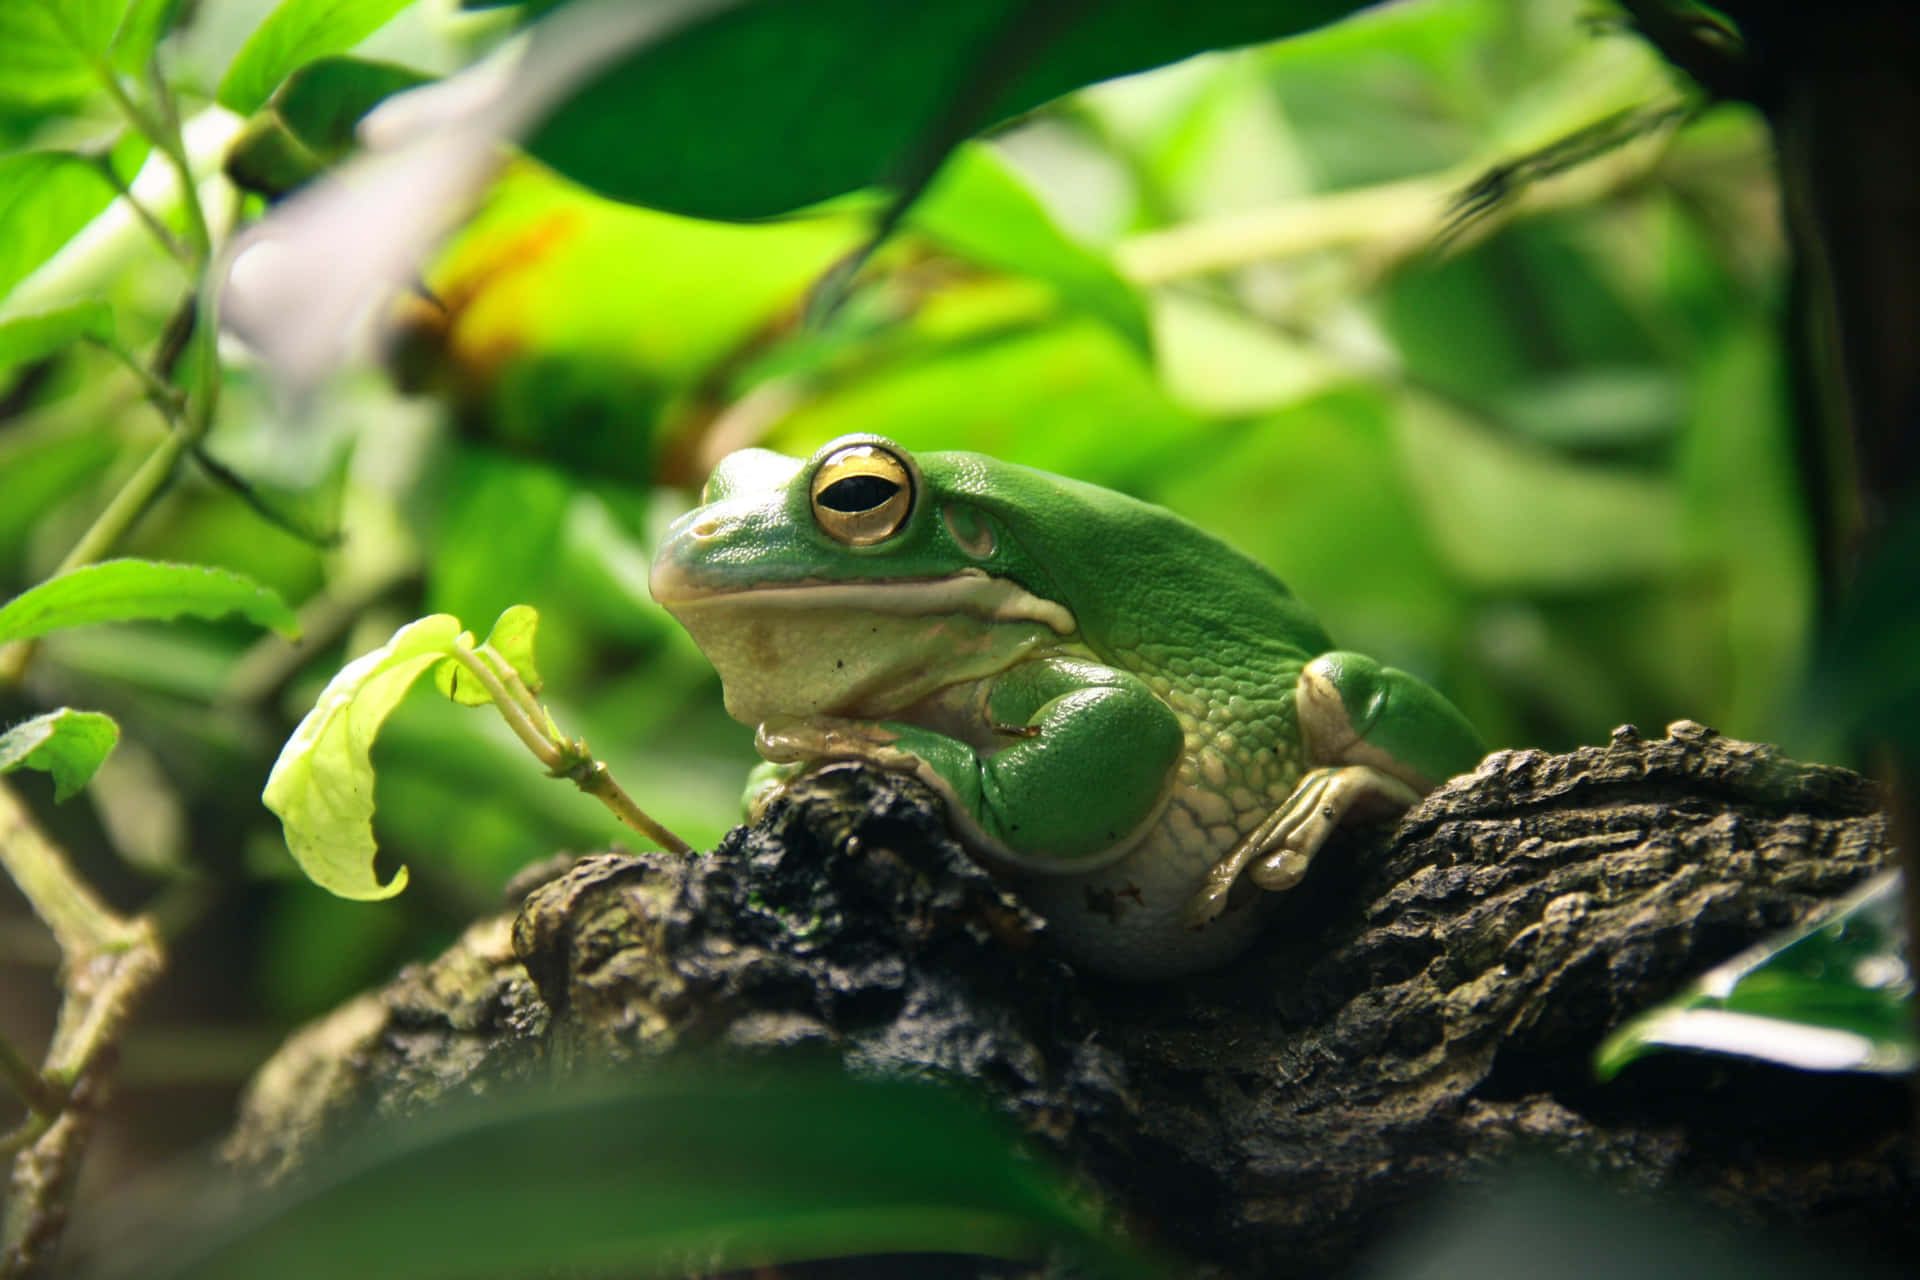 A big frog lounging on green leaves